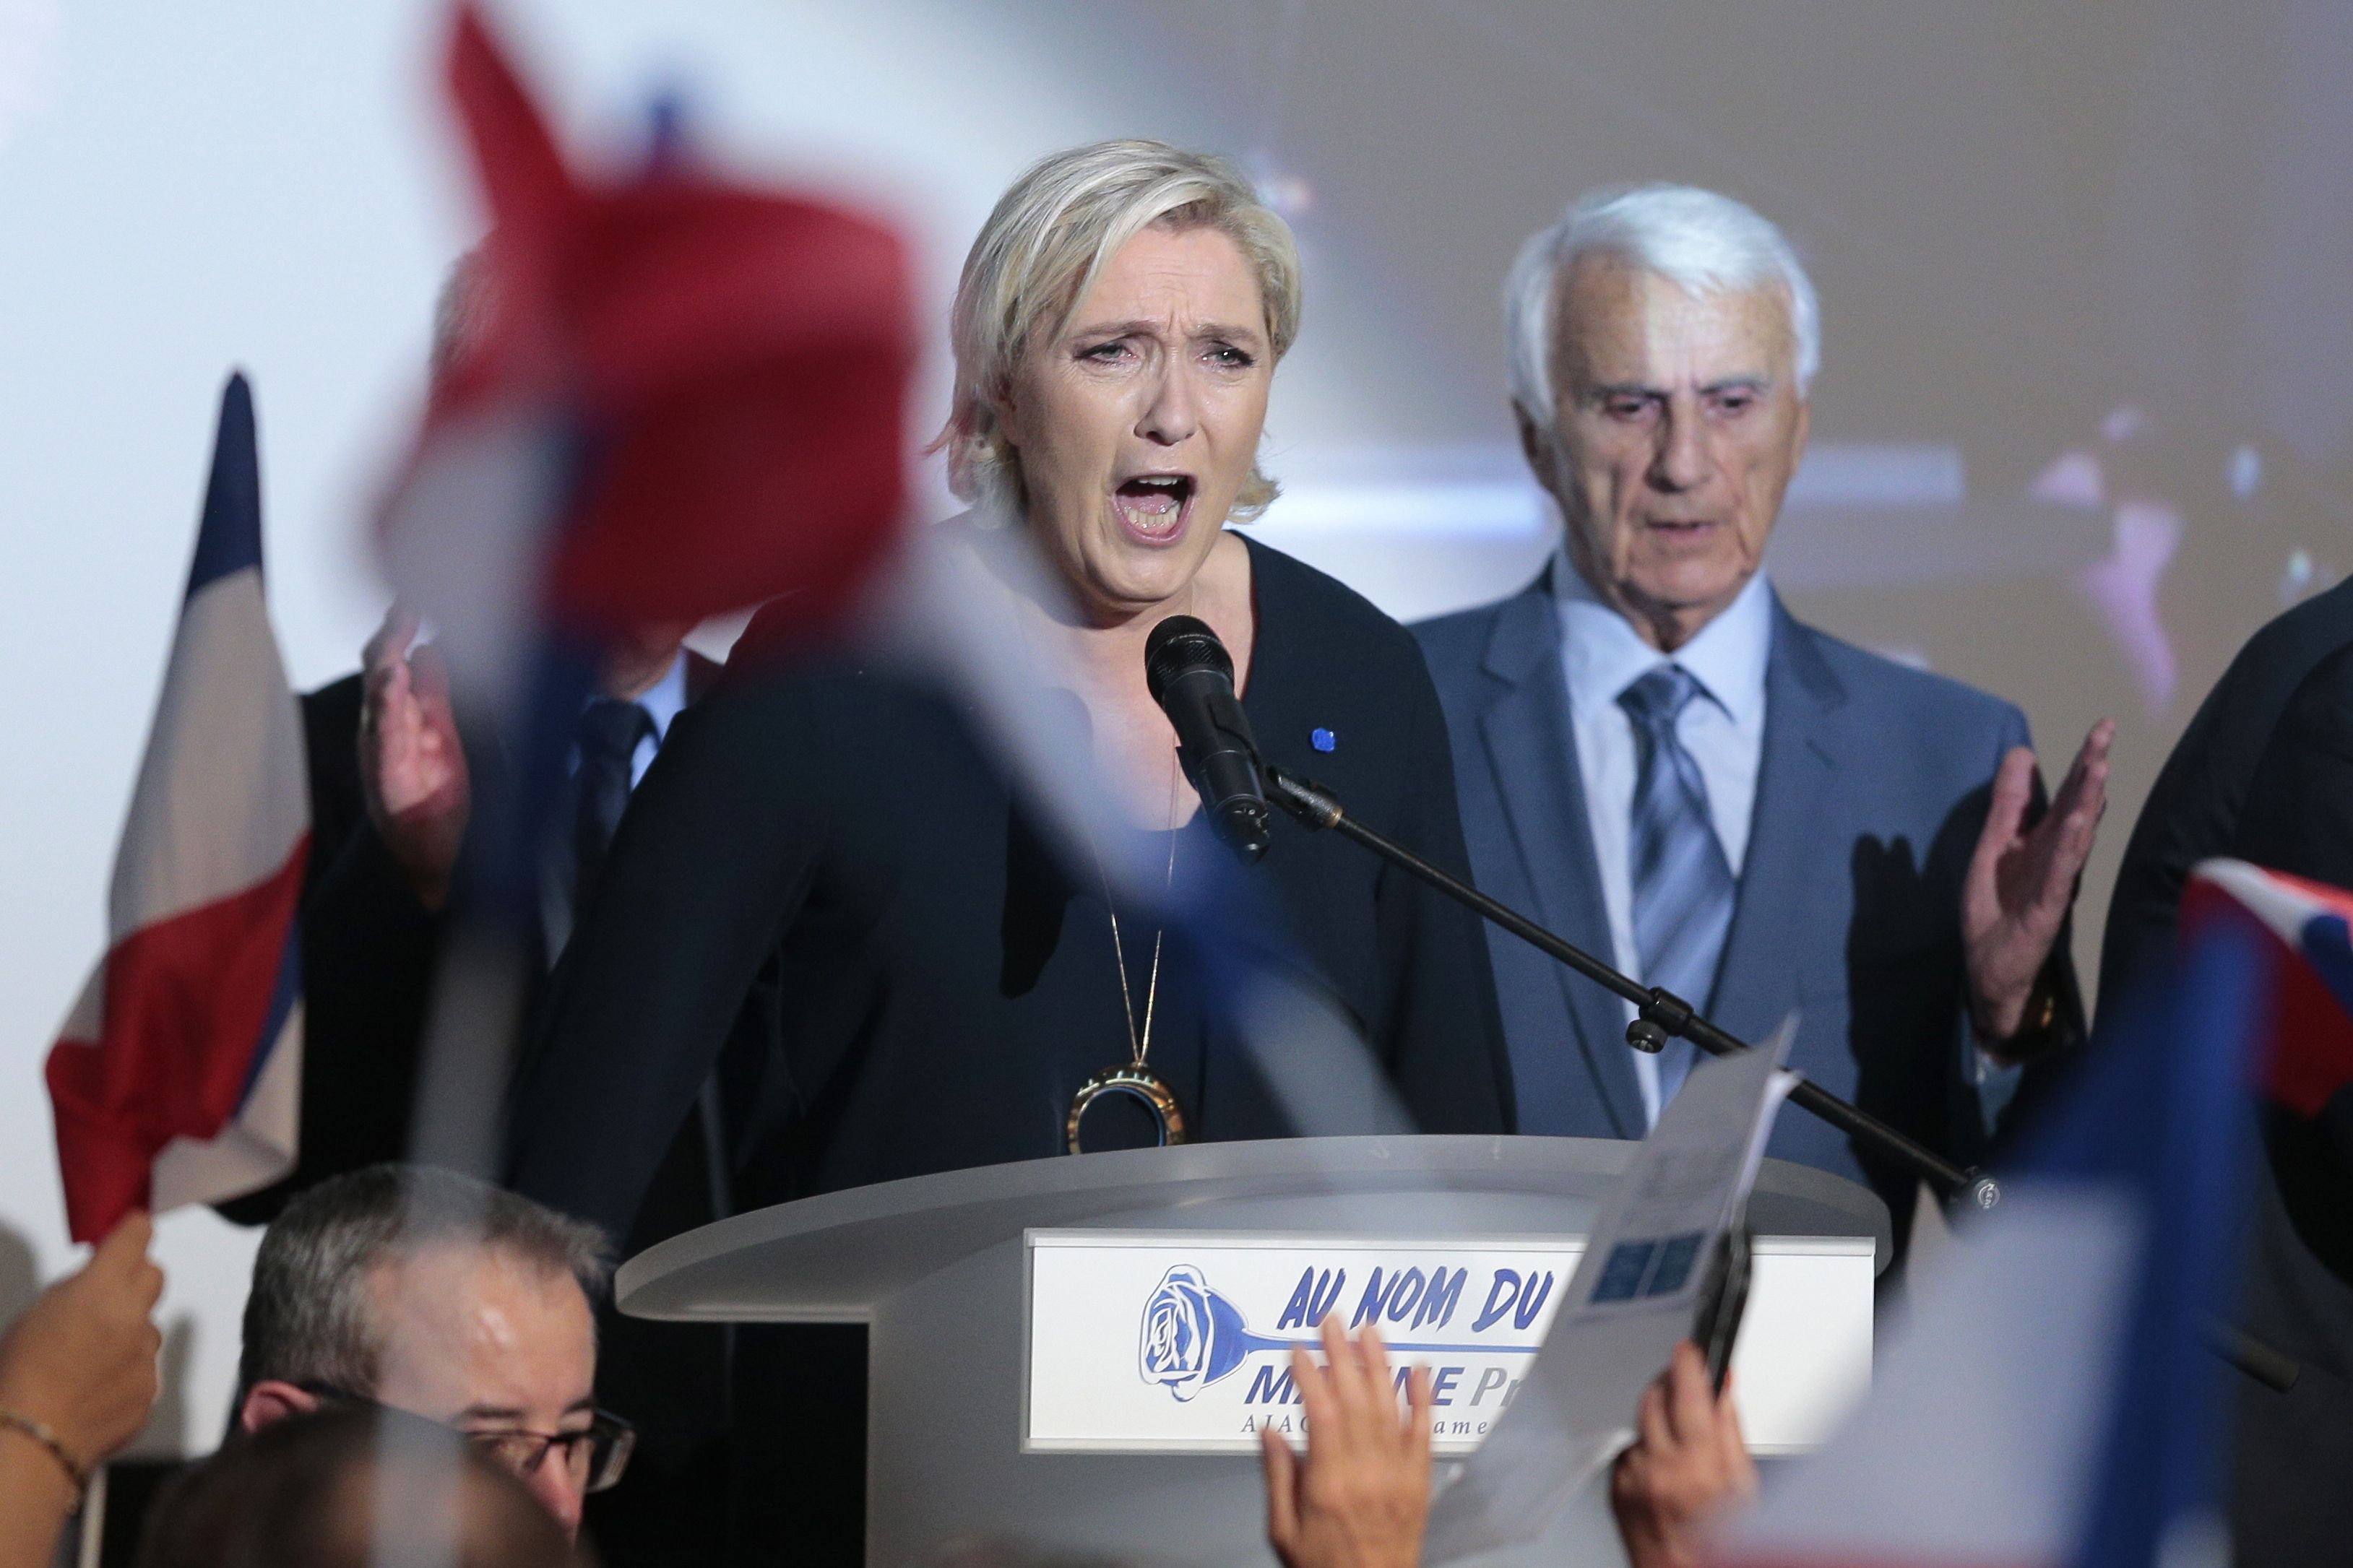 French presidential election candidate for the far-right Front National (FN) party Marine Le Pen delivers a speech during a campaign meeting at the Palais des Congres in Ajaccio on the French Mediterranean island of Corsica, on April 8, 2017. (Pascal Pochard-Casabianca—AFP/Getty Images)